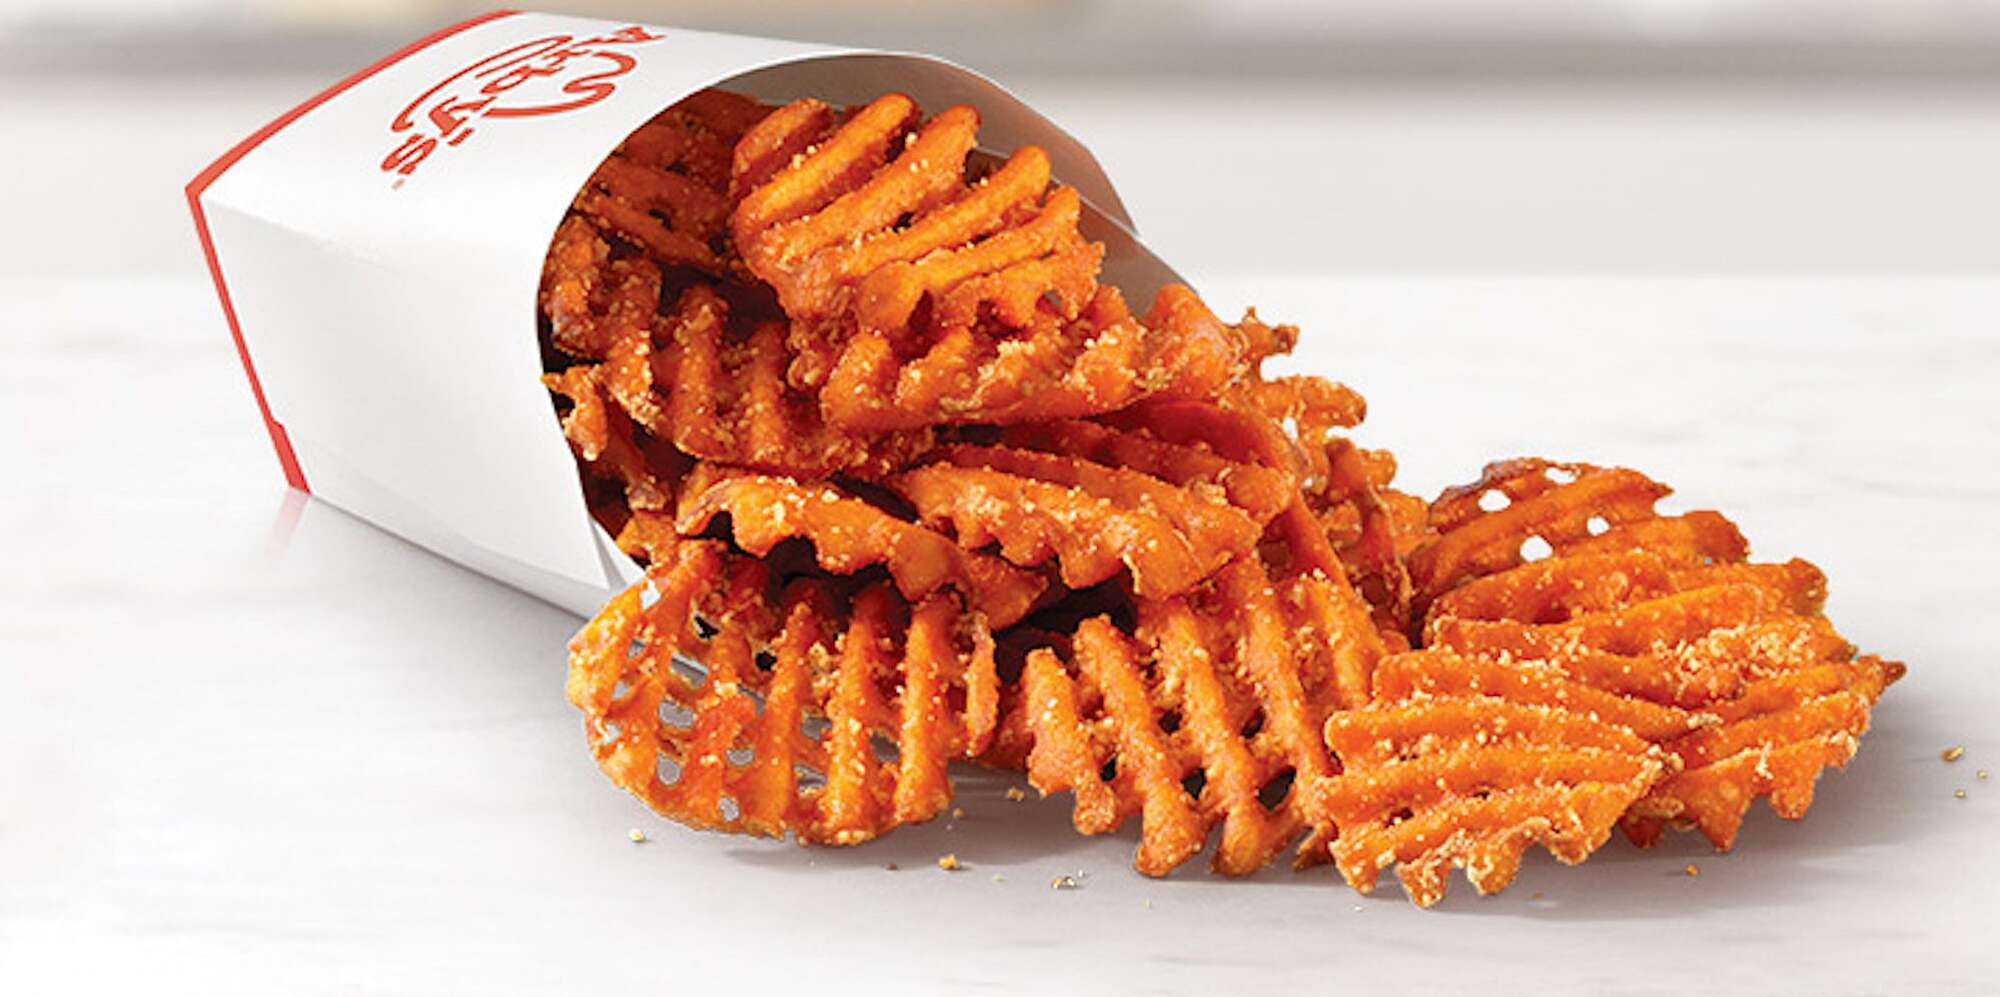 Arby's New Sweet Potato Waffle Fries Are the Perfect Balance of Salty